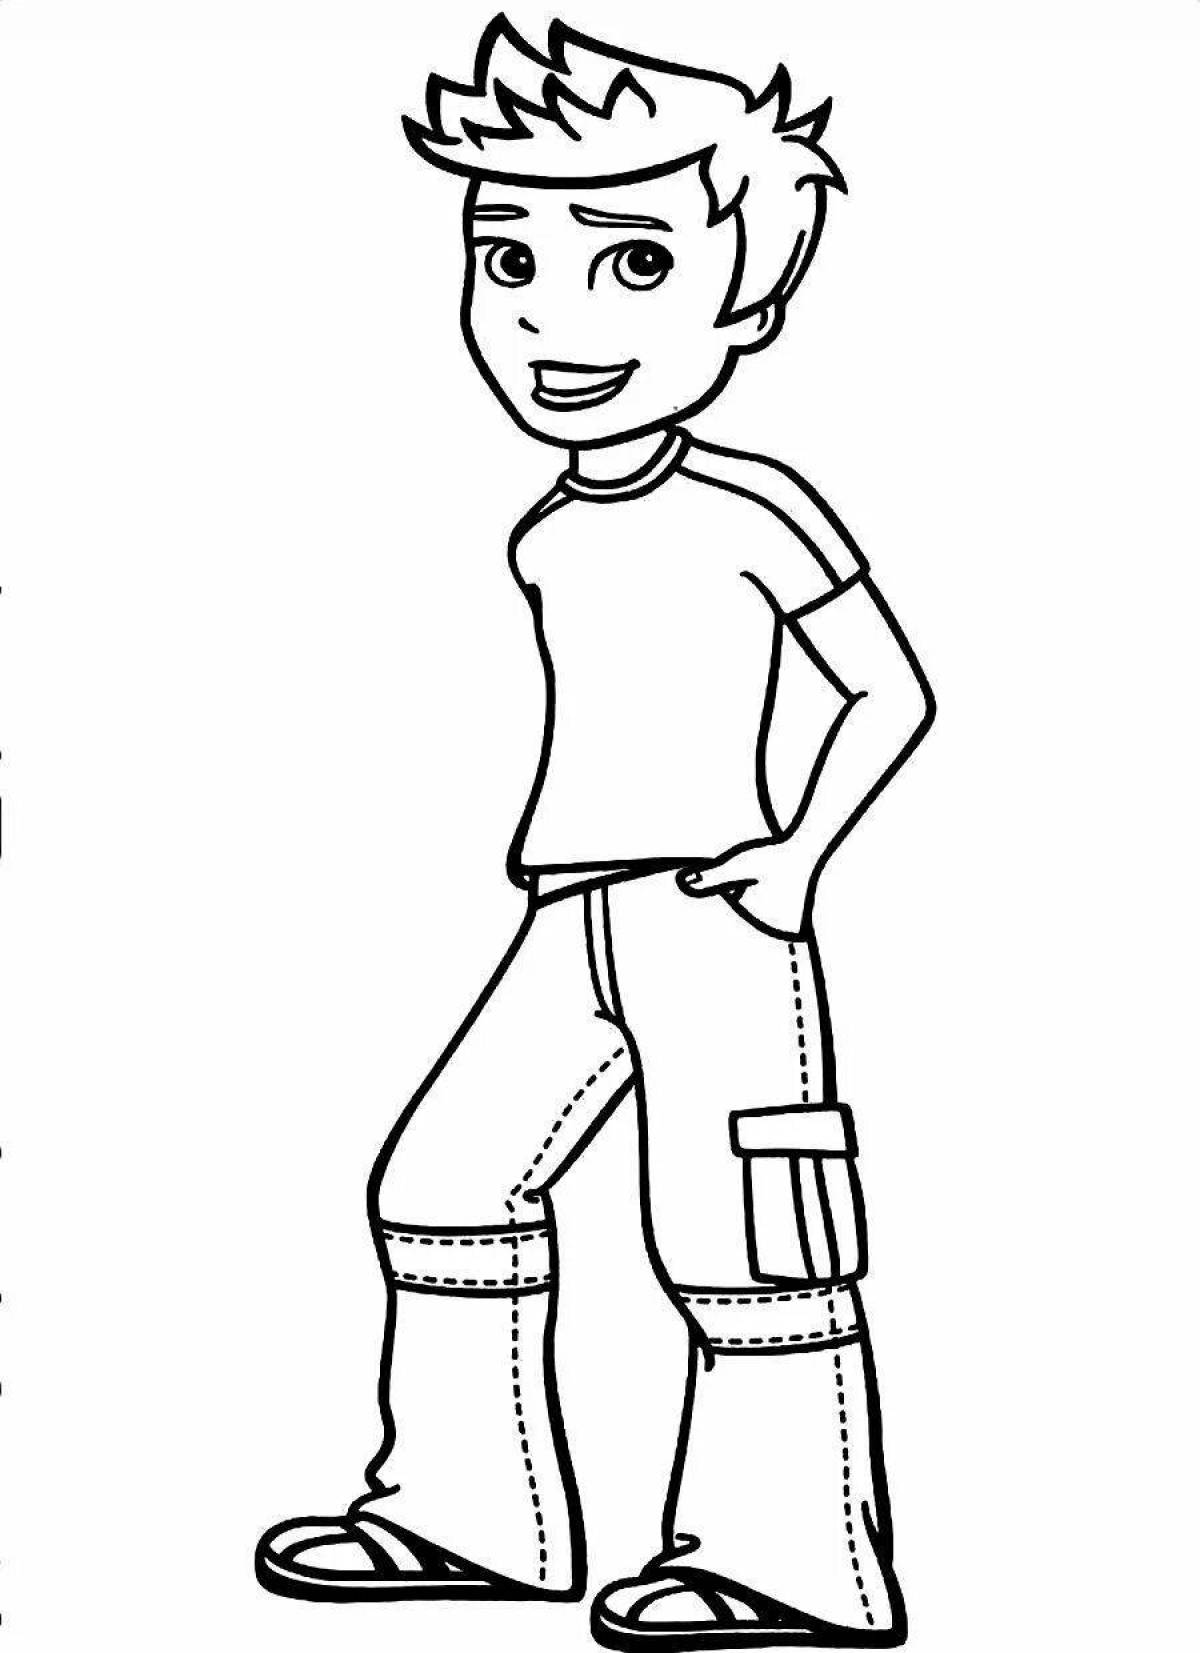 Coloring page joyful brother